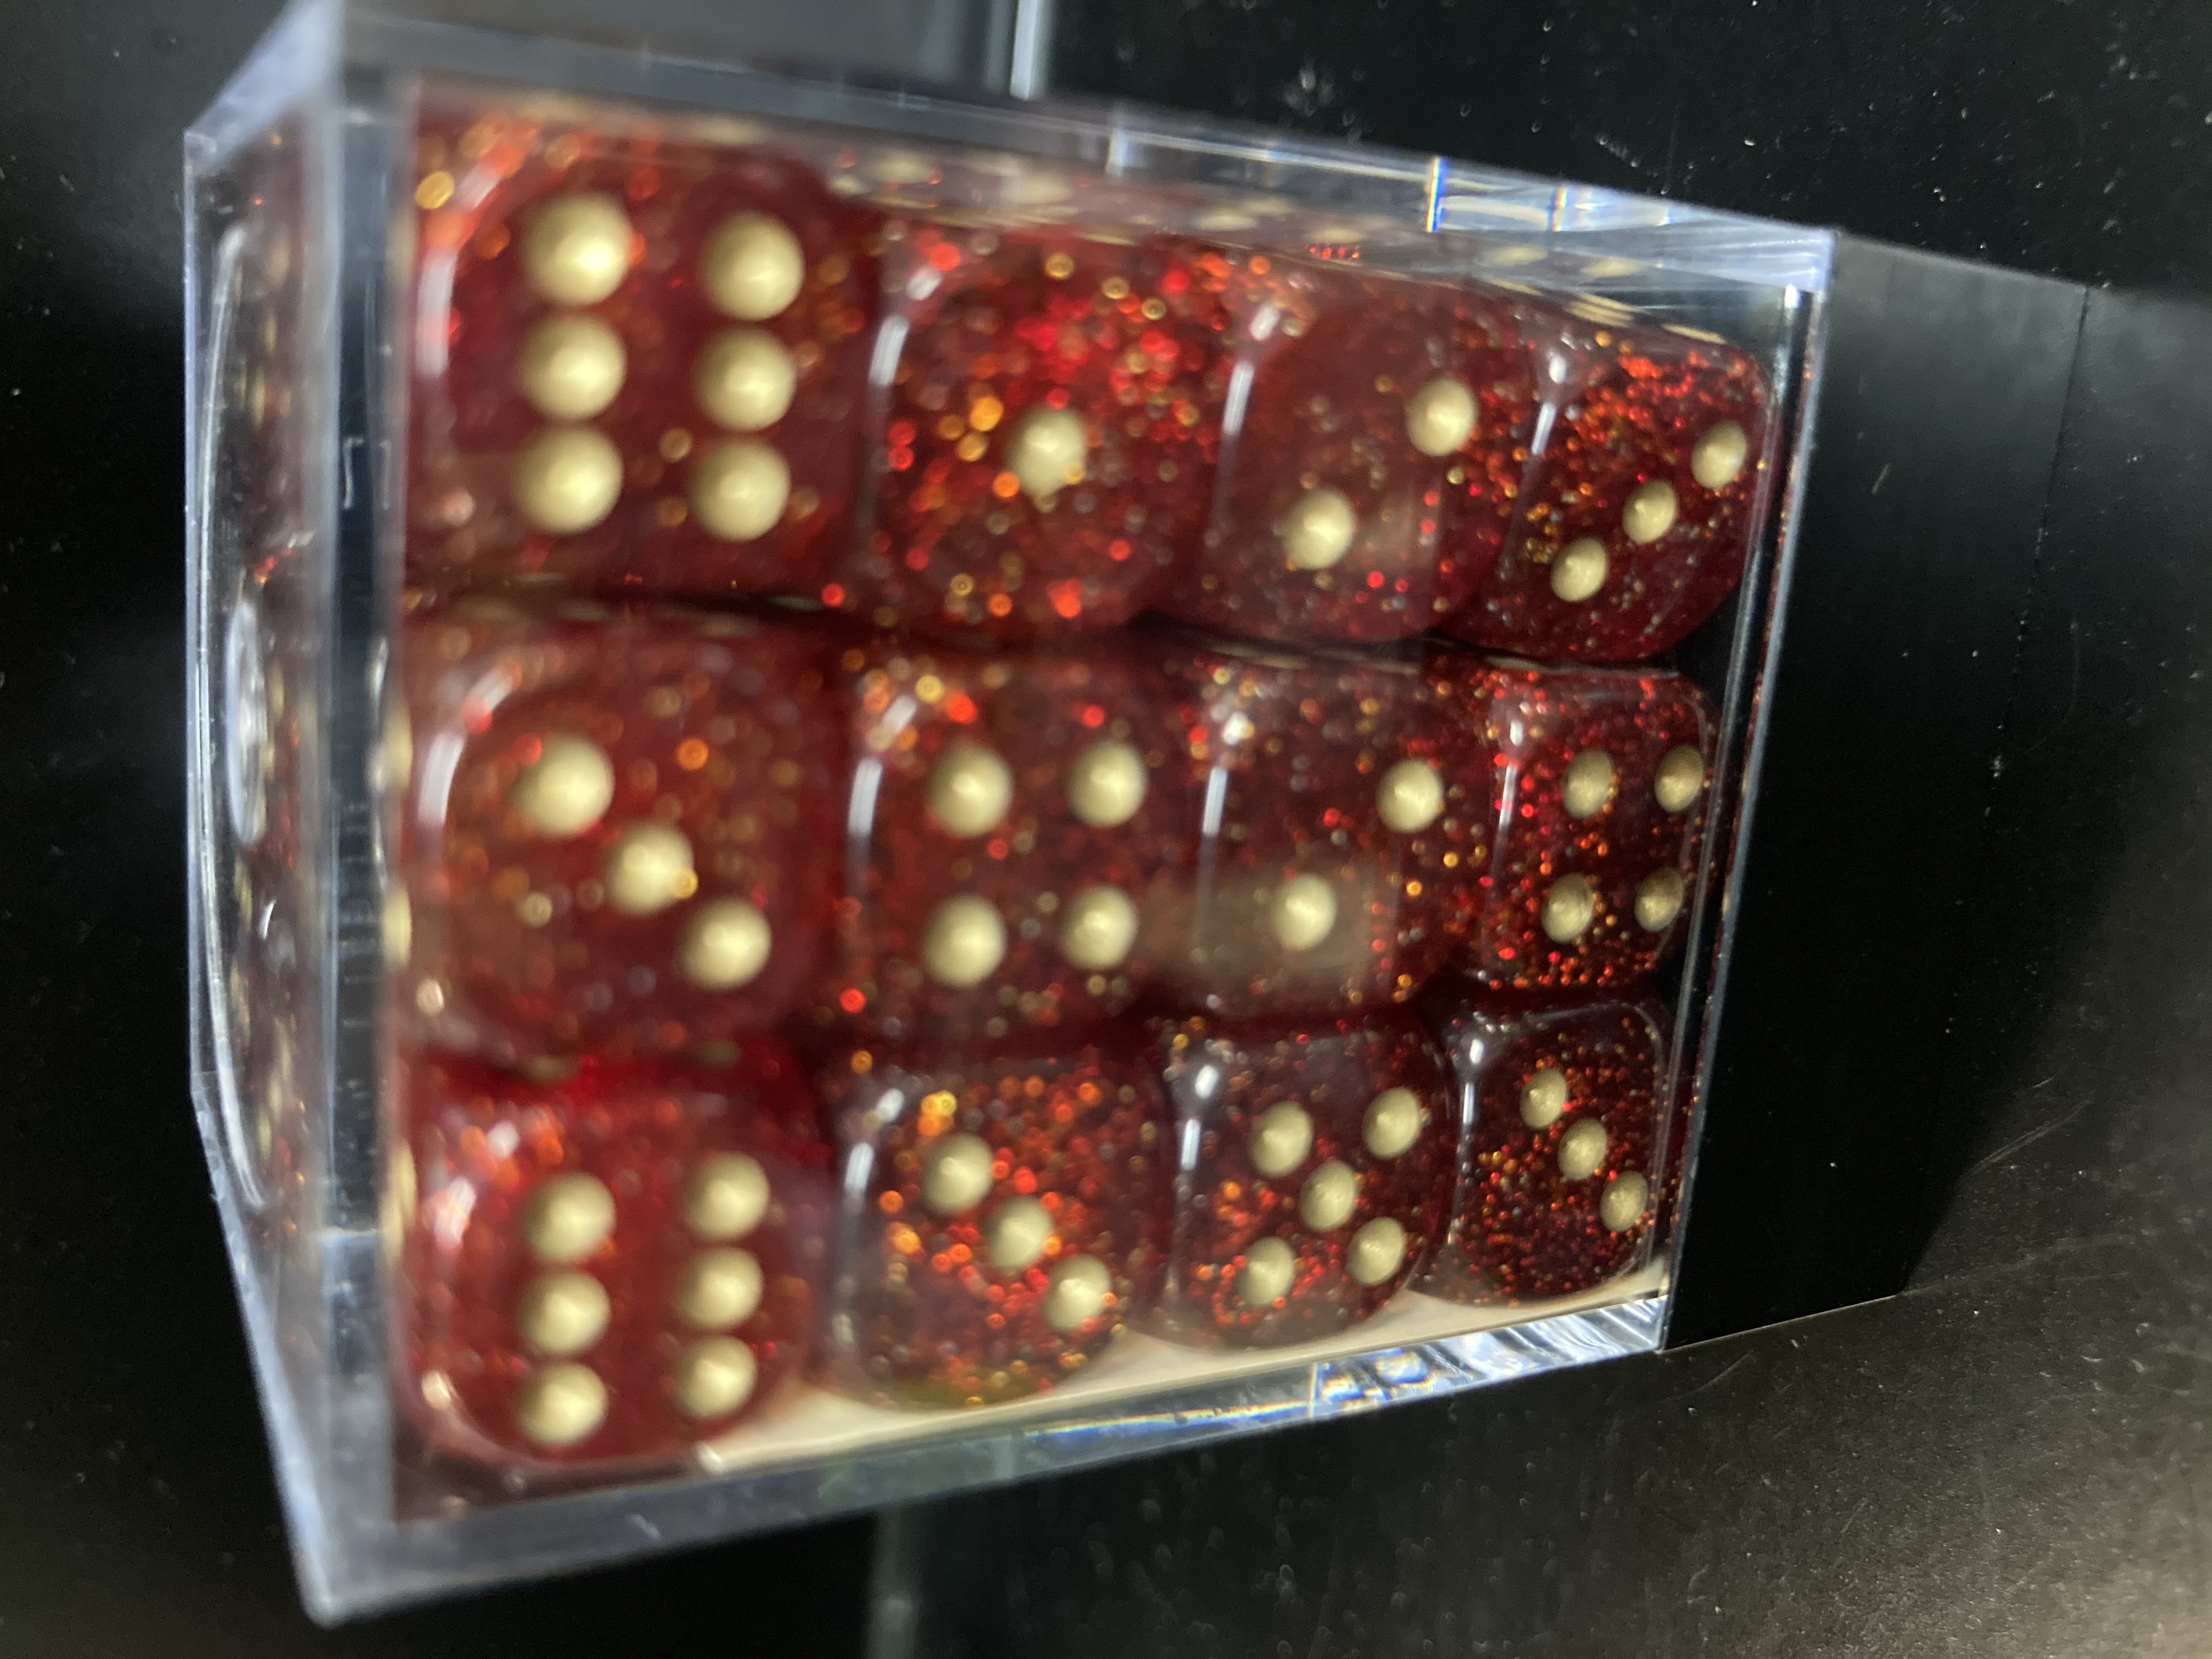 Block of 36 6-Sided 12mm Dice - Chessex Glitter Ruby with Gold Numerals CHX 27904